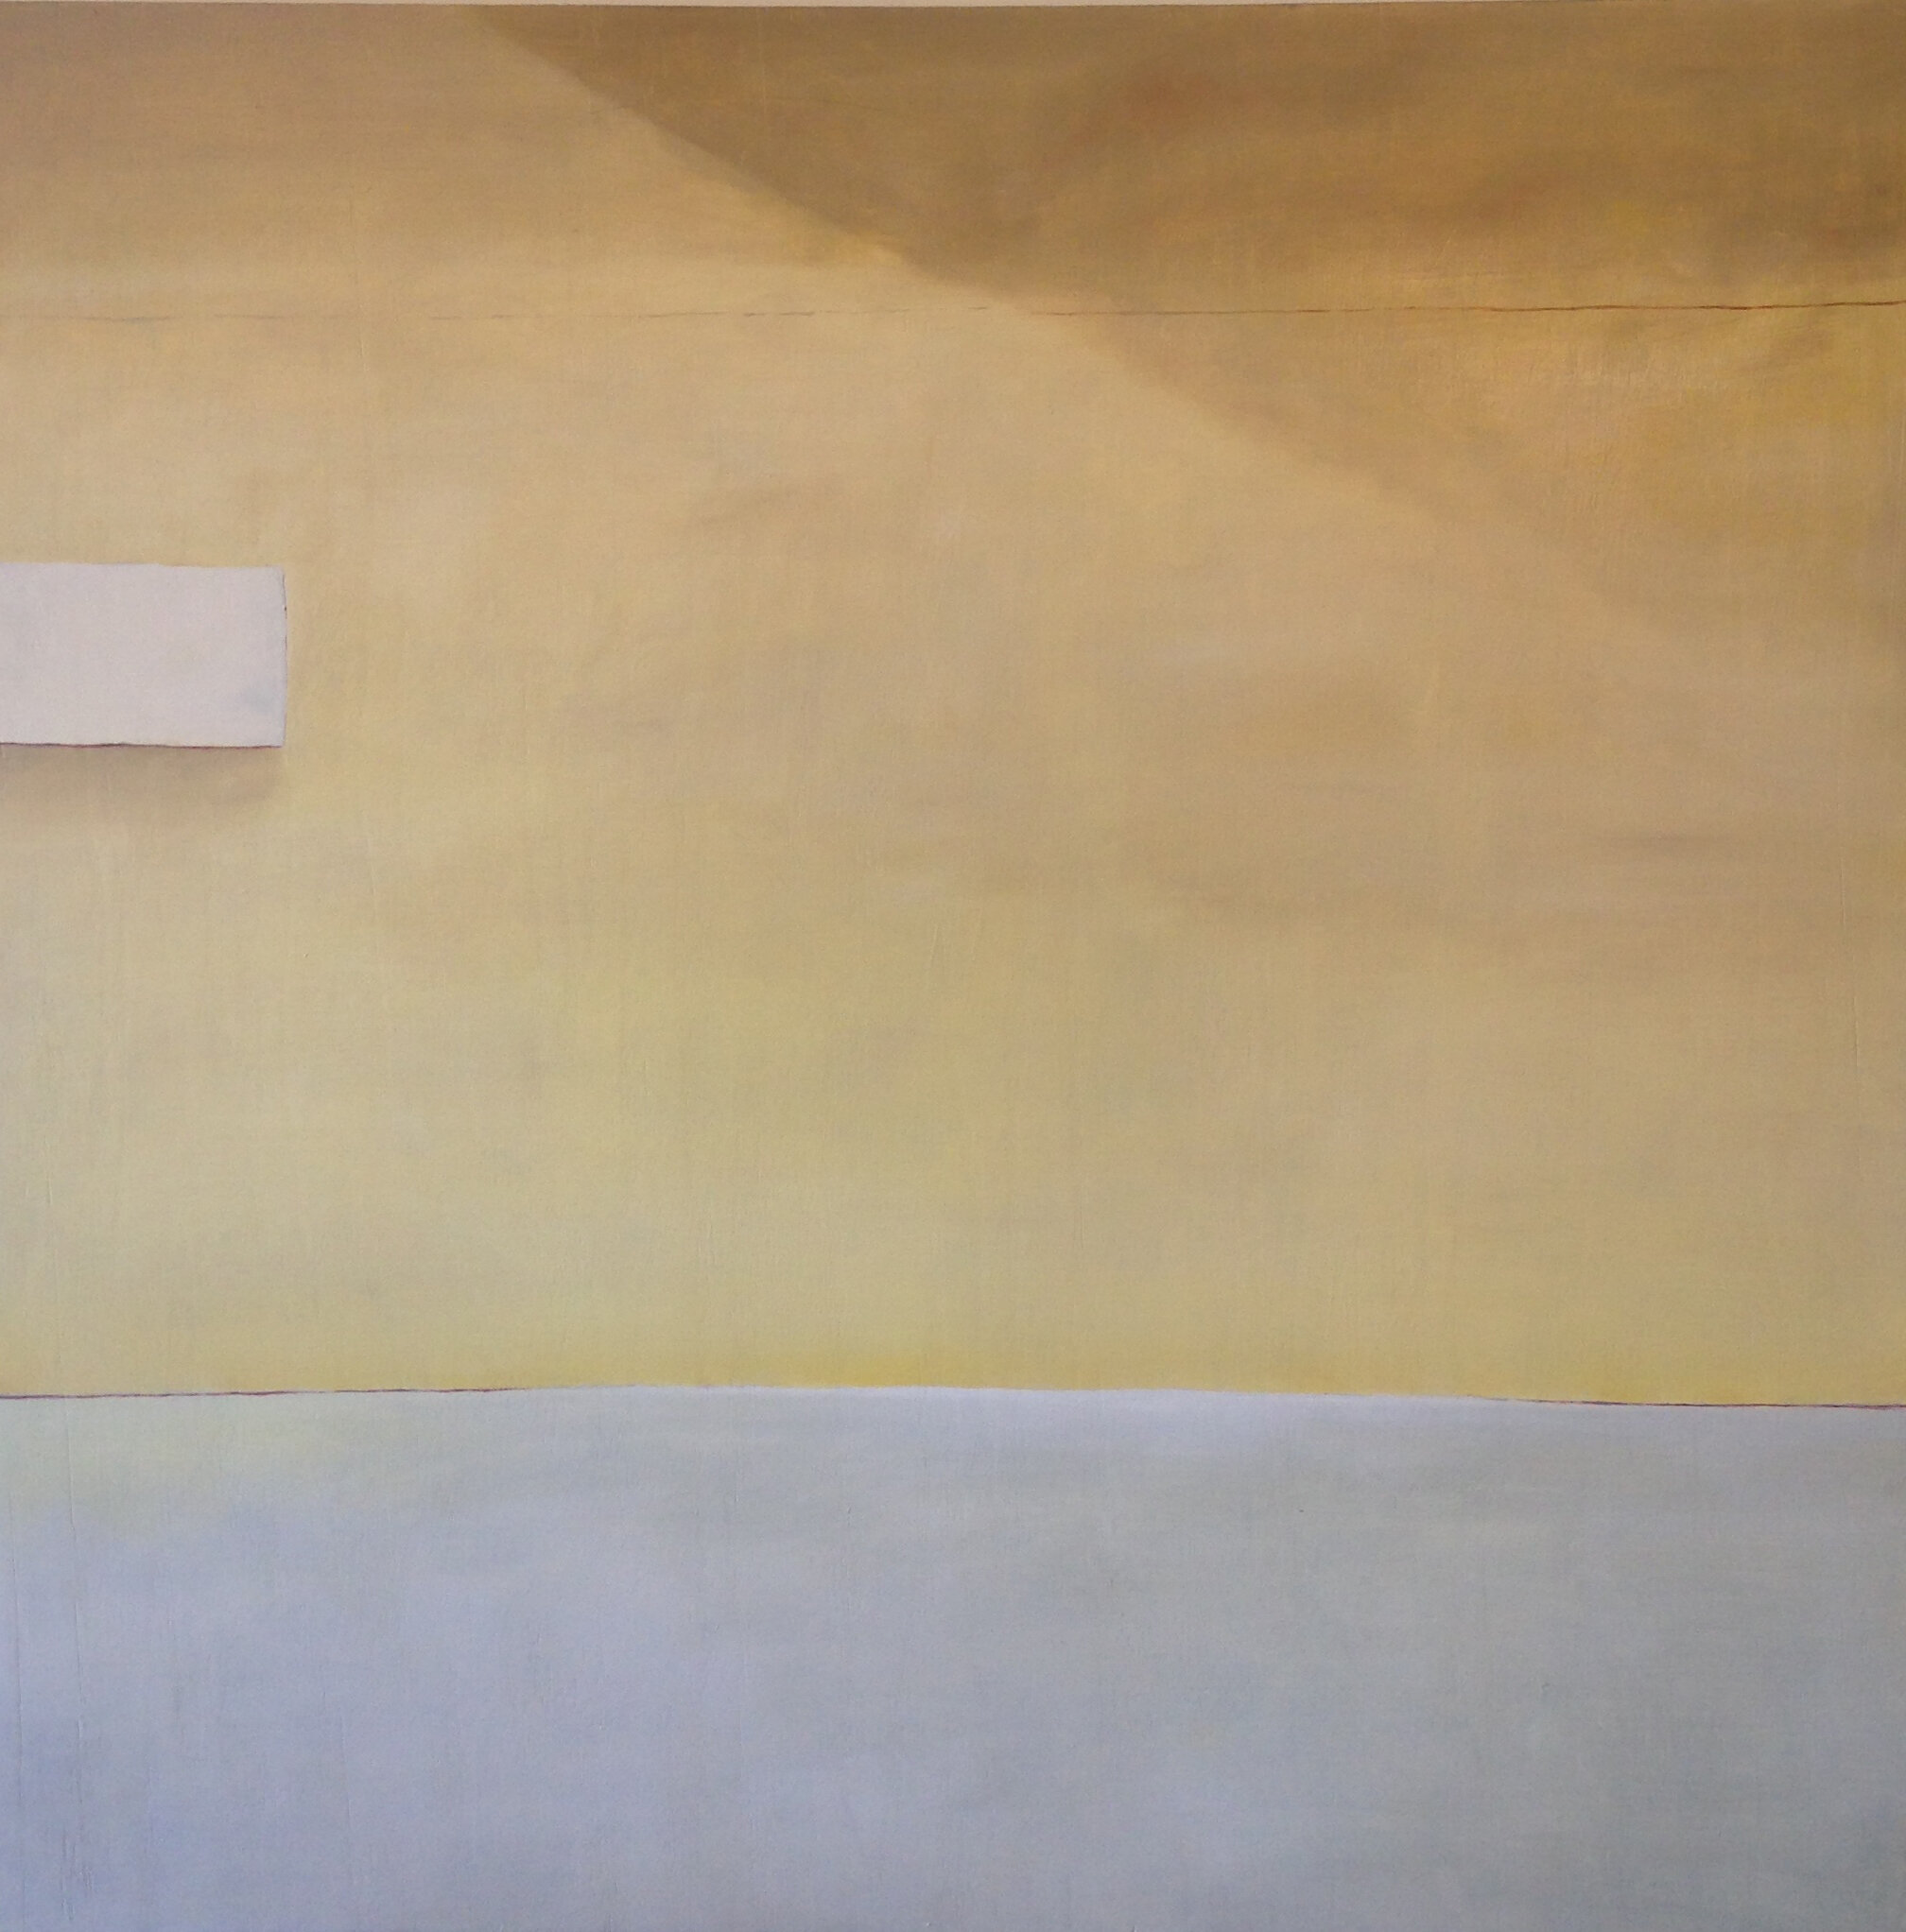   Yellow Wall , 2016  Oil on Panel, 48 x 48” 